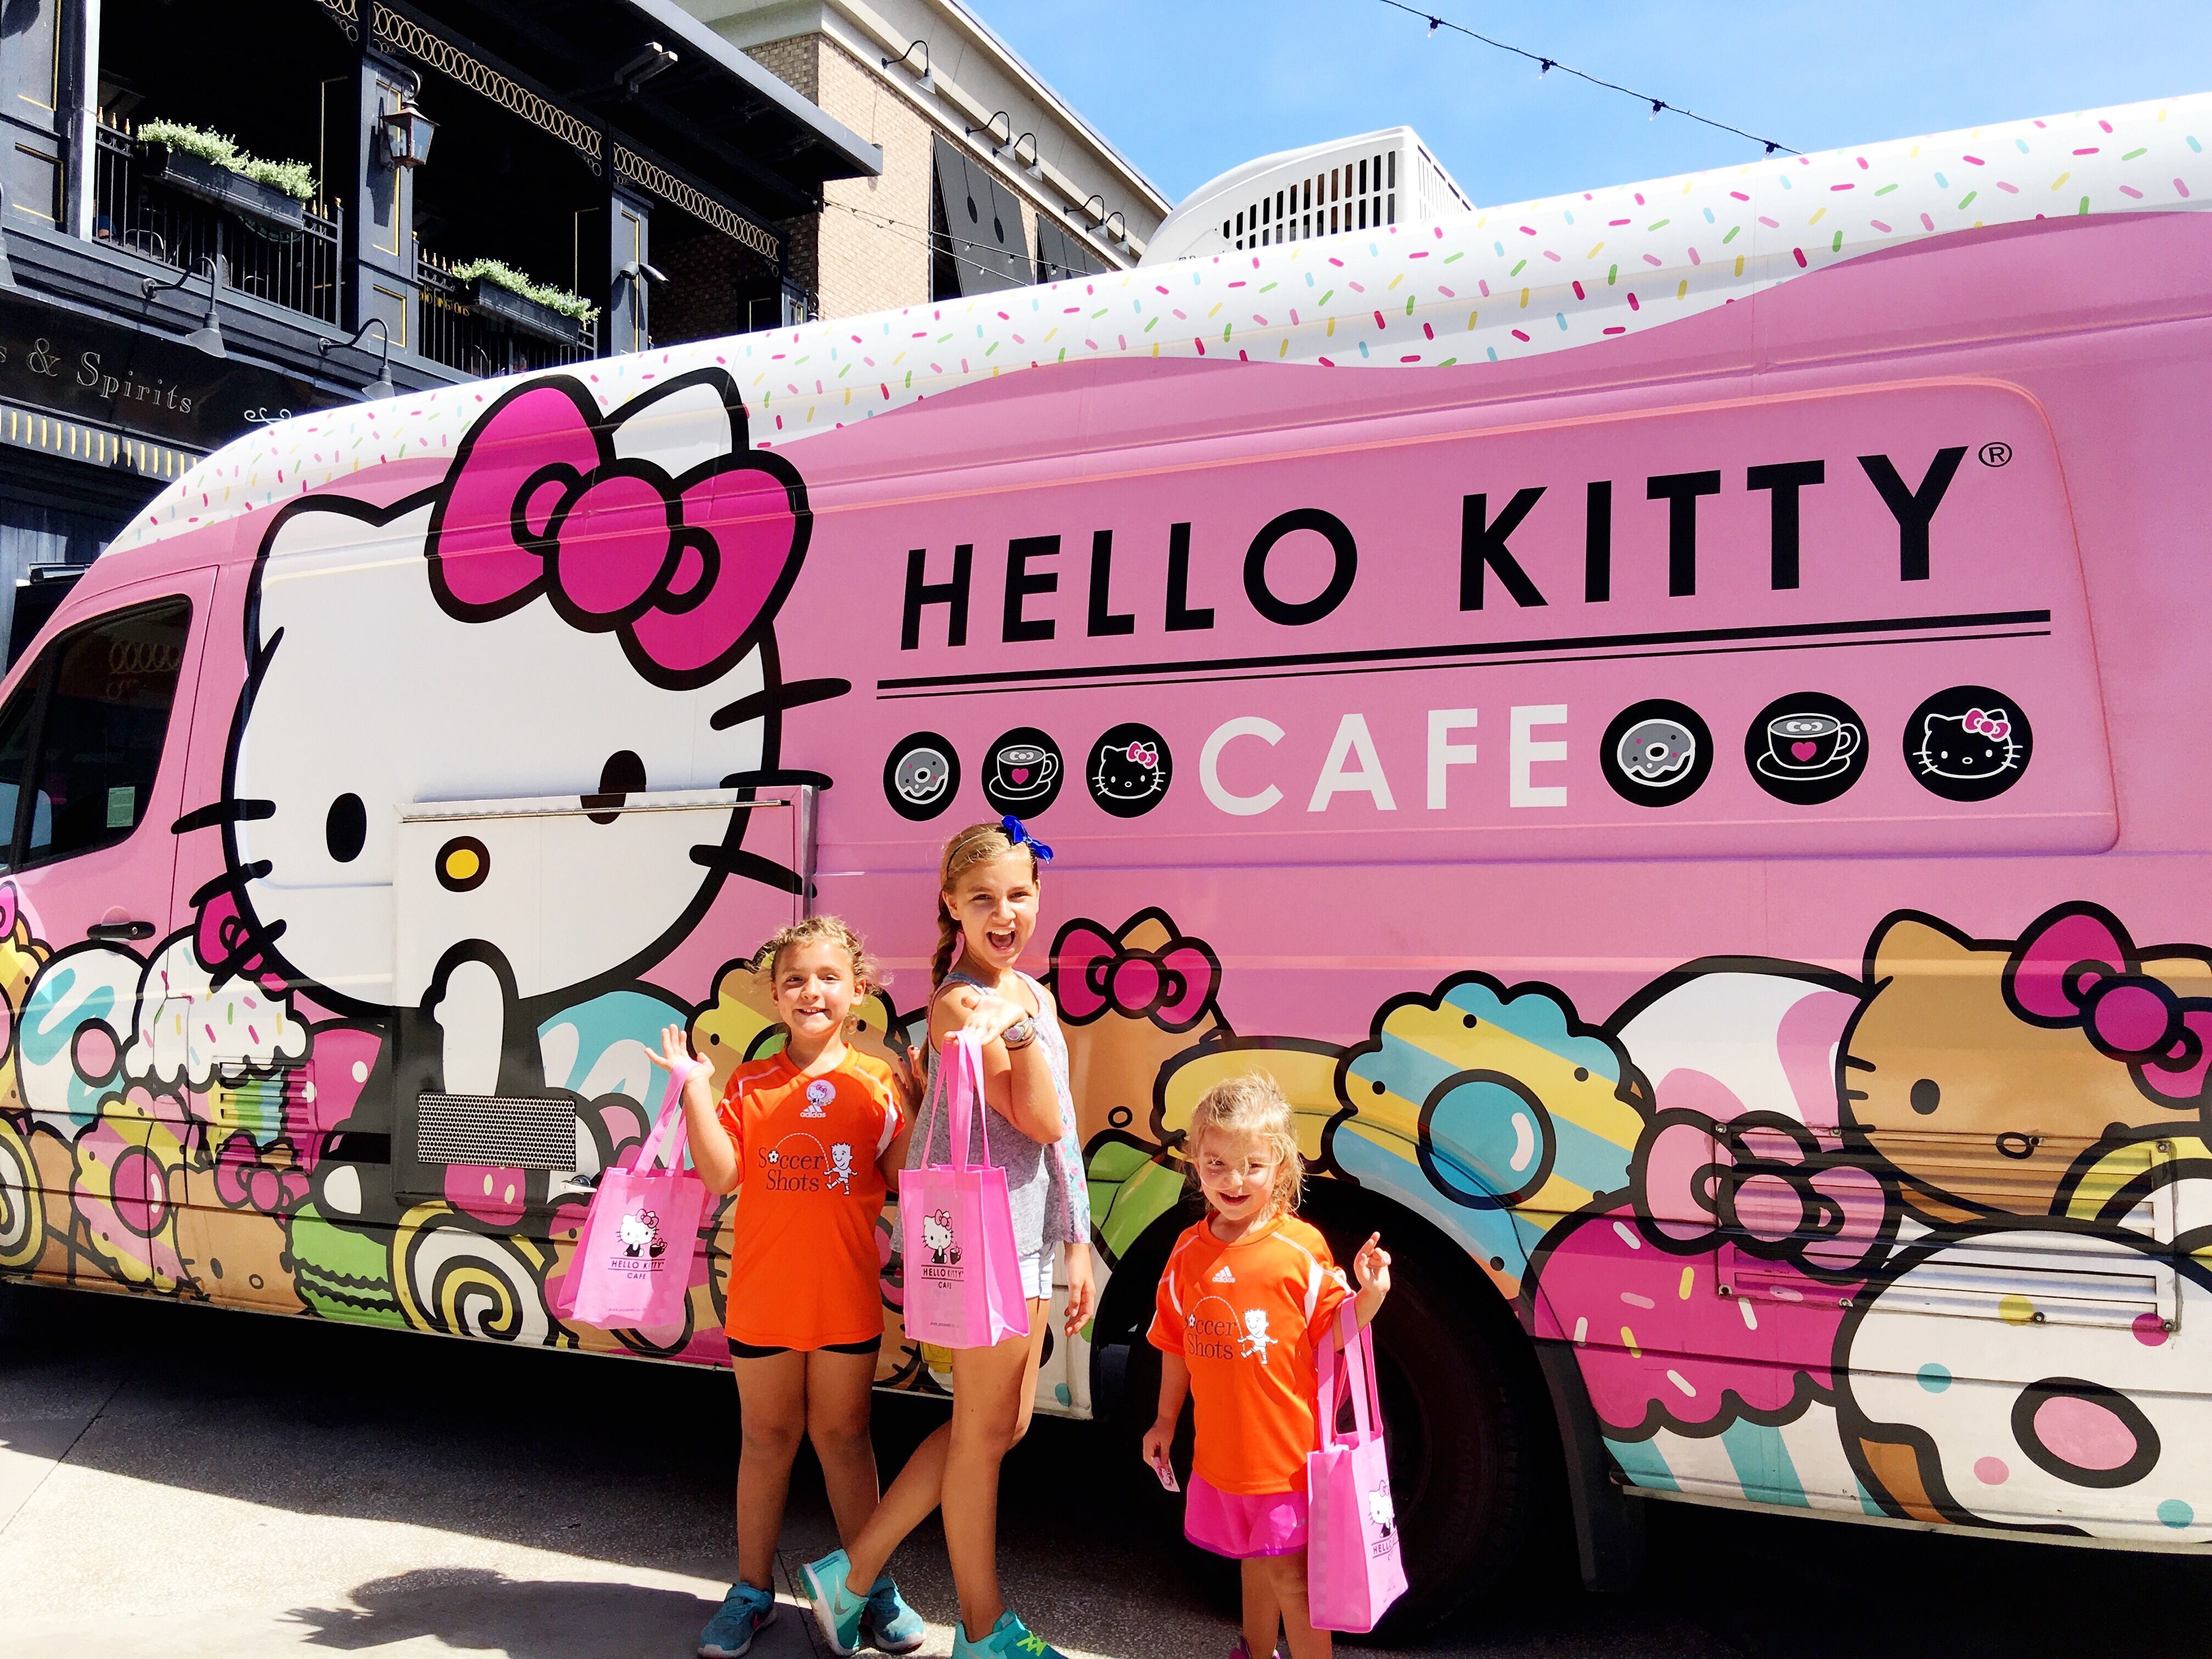 Hello Kitty Cafe Truck Comes to Tampa at International Plaza Saturday, February 11th || Tampa Mama